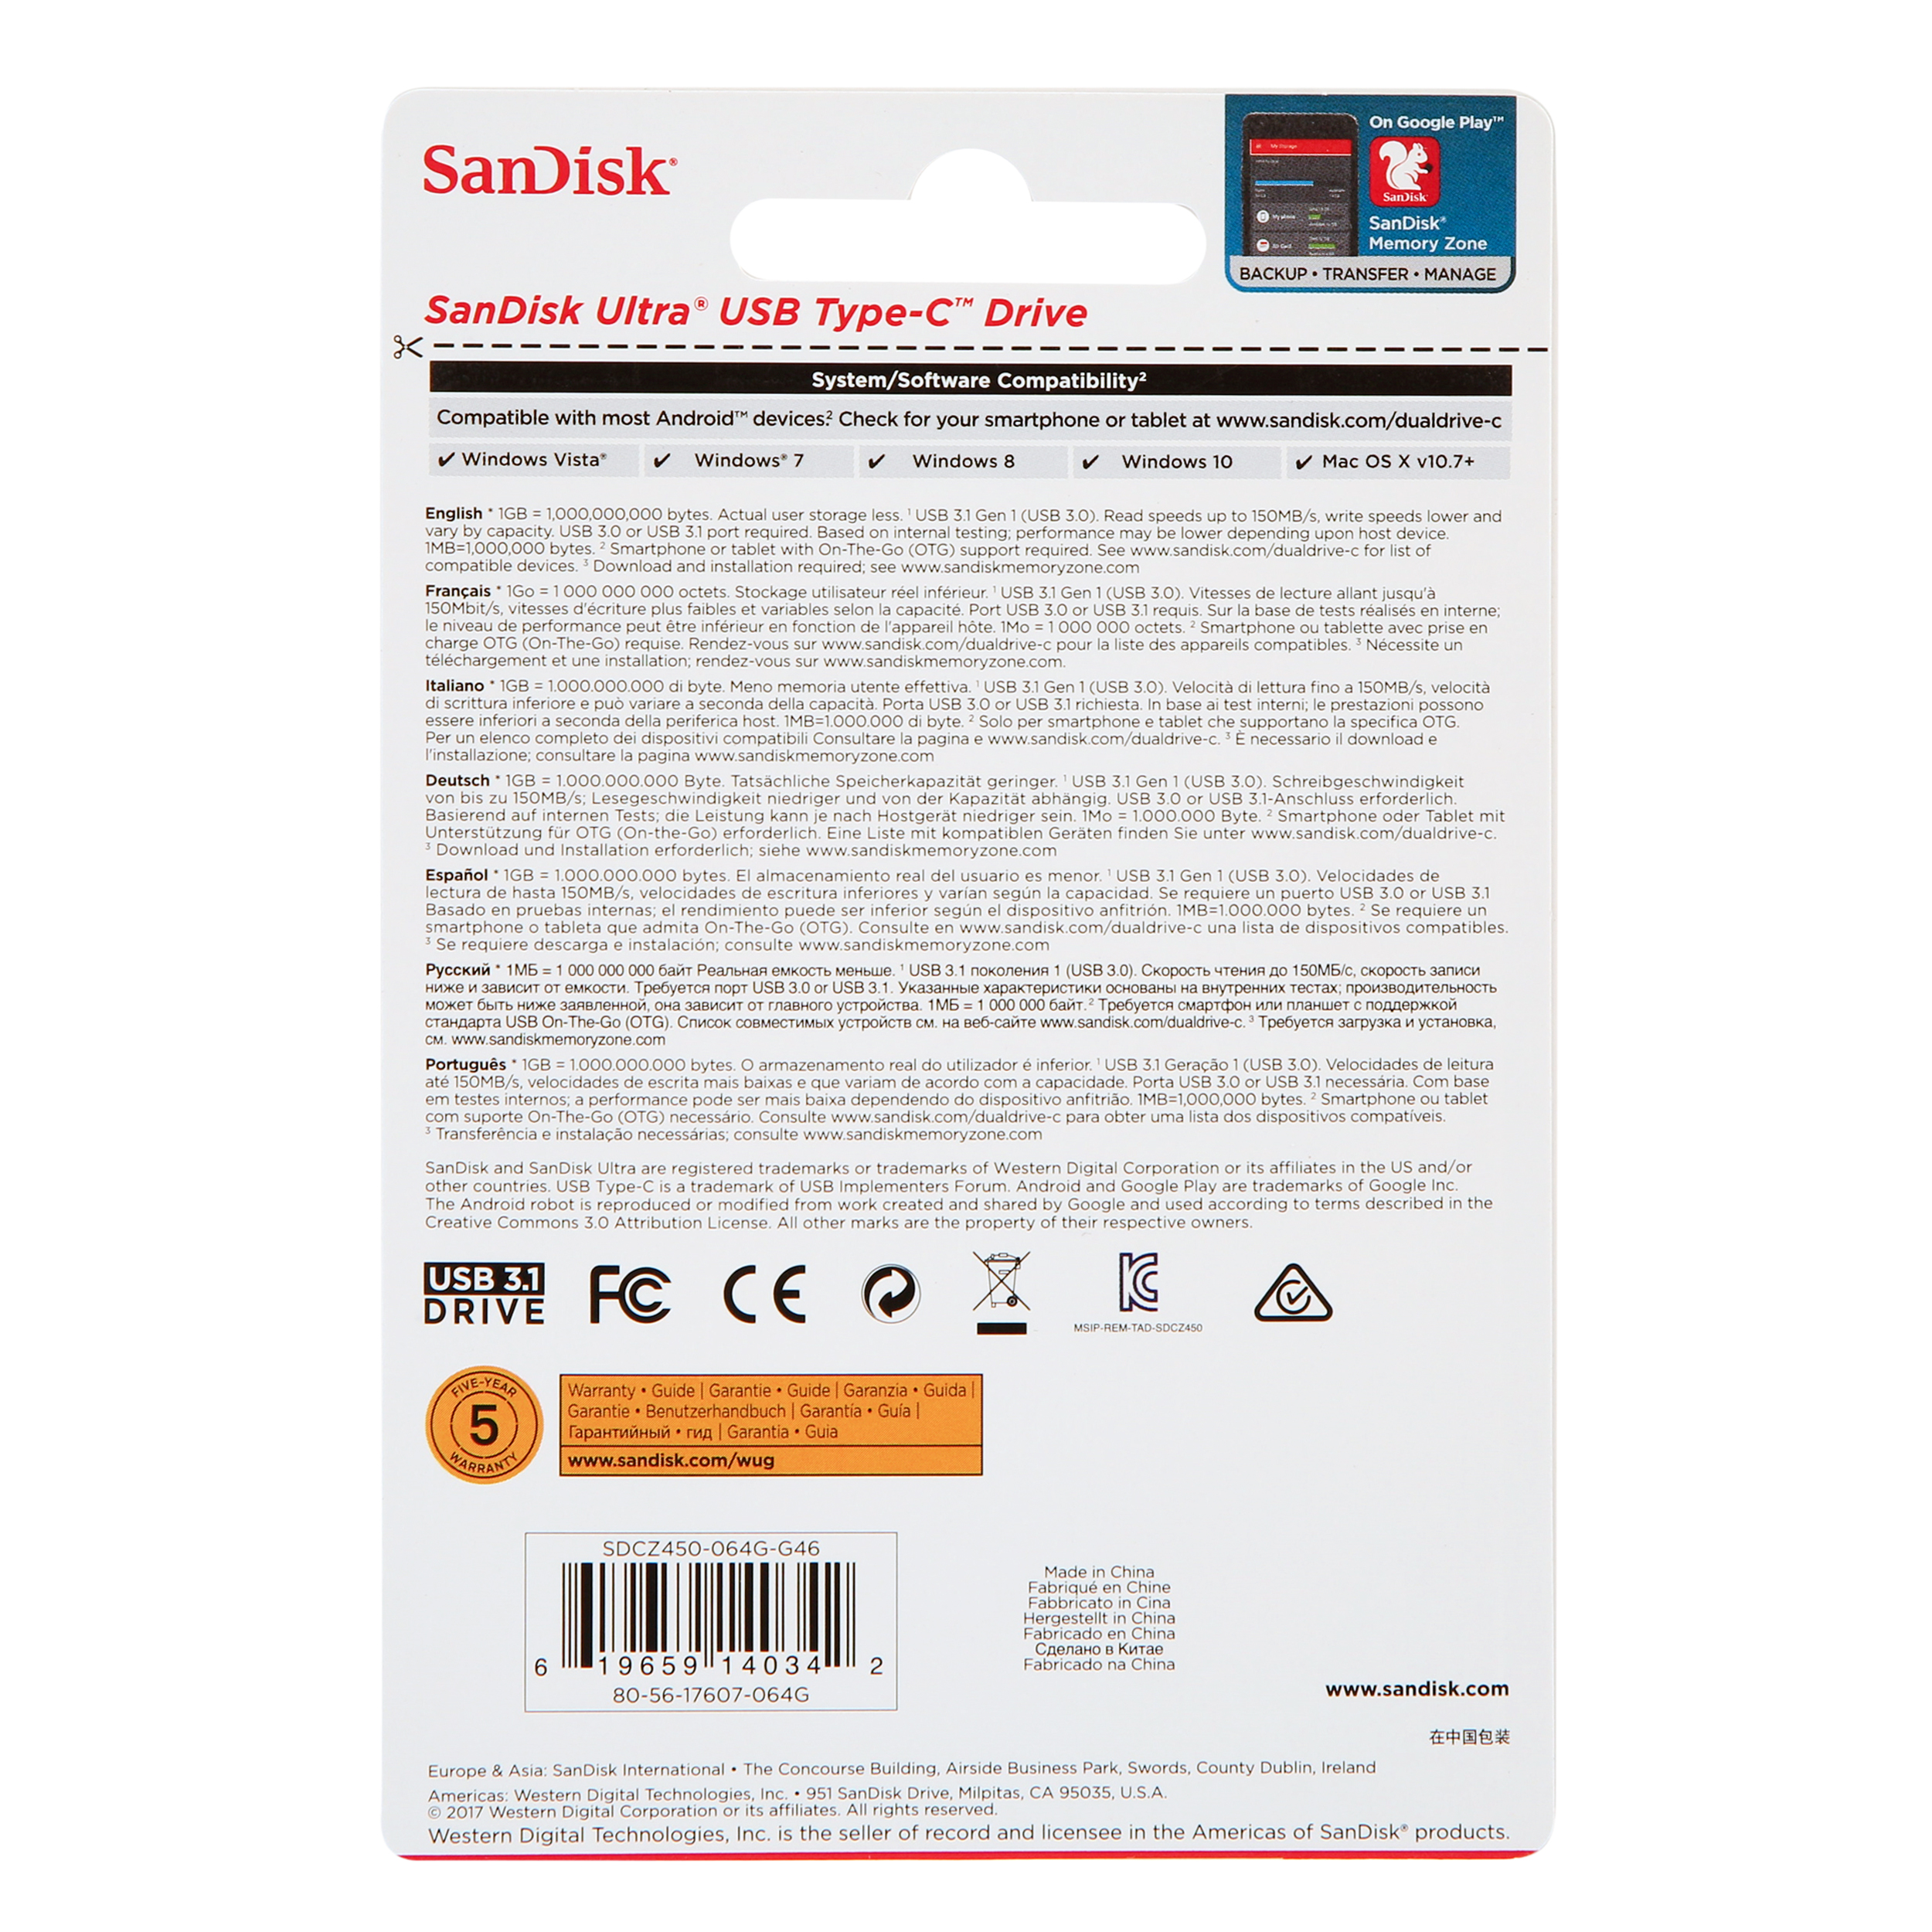 SanDisk Ultra USB Type-C 64GB Flash Drive (SDCZ450-064G-G46) - image 2 of 5